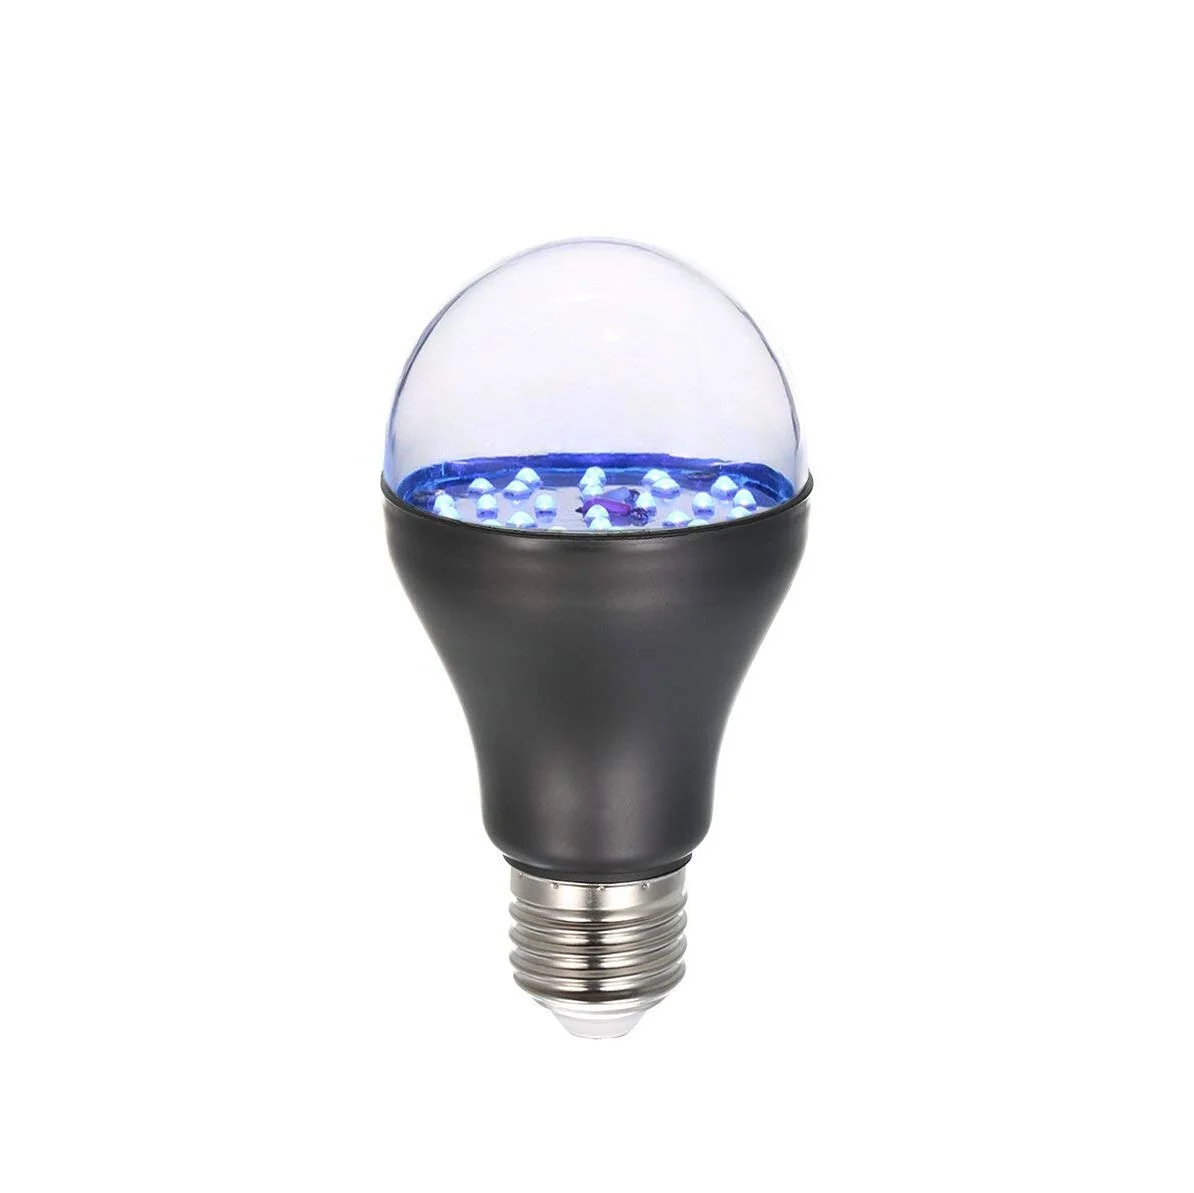 UV LED bulb with a clear top and visible blue LEDs inside ideal for sterilization and other specialized applications